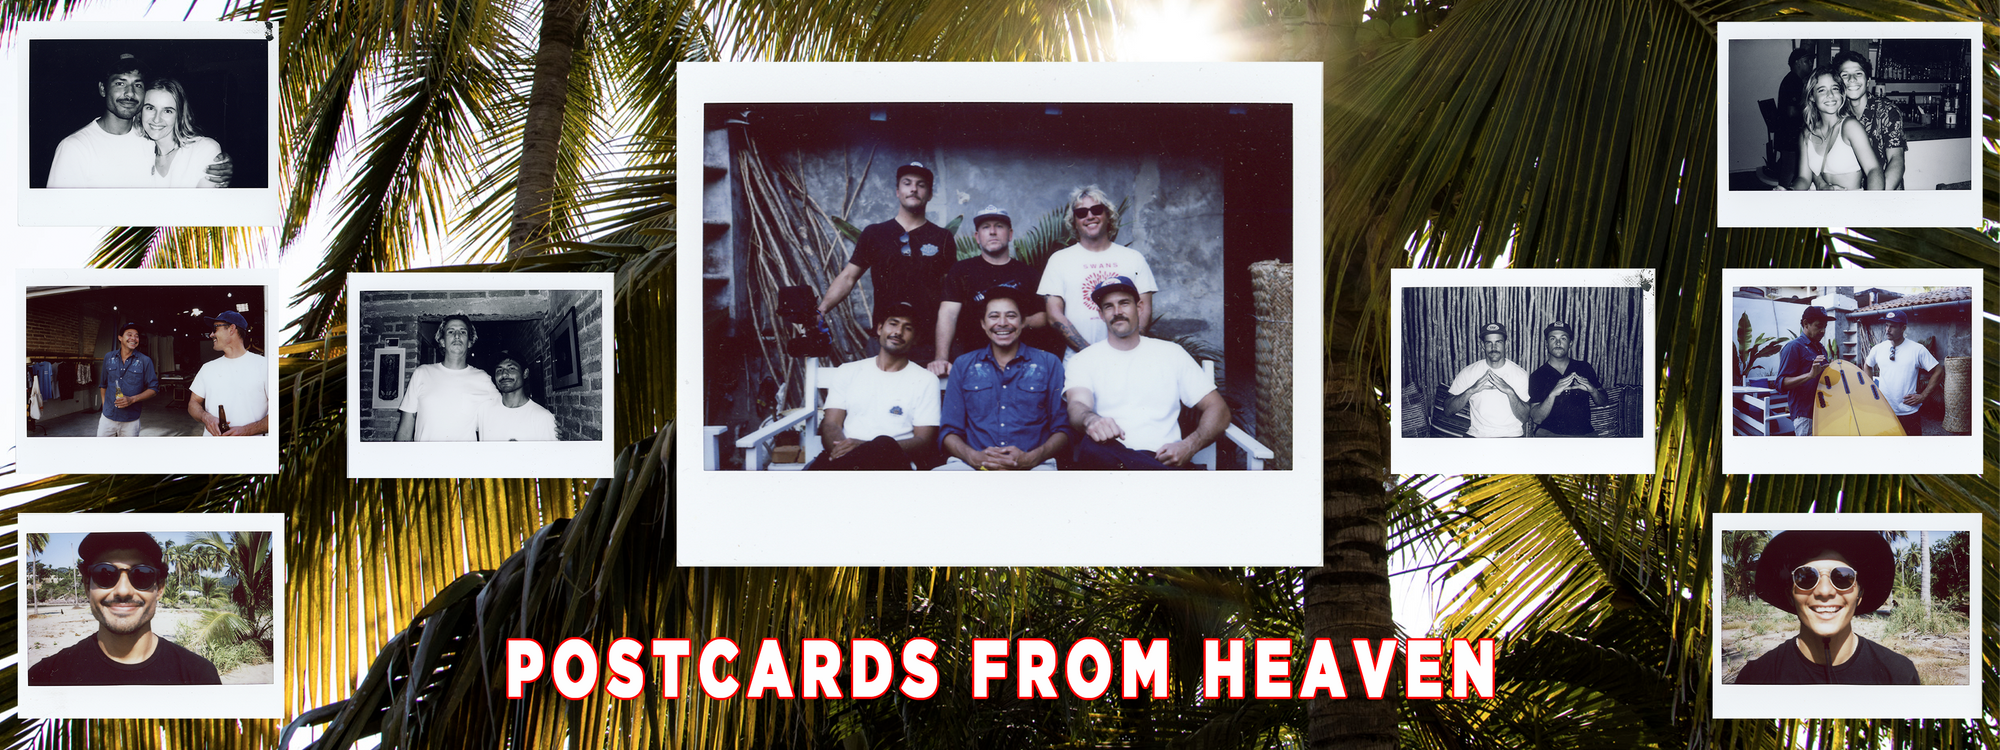 POSTCARDS FROM HEAVEN